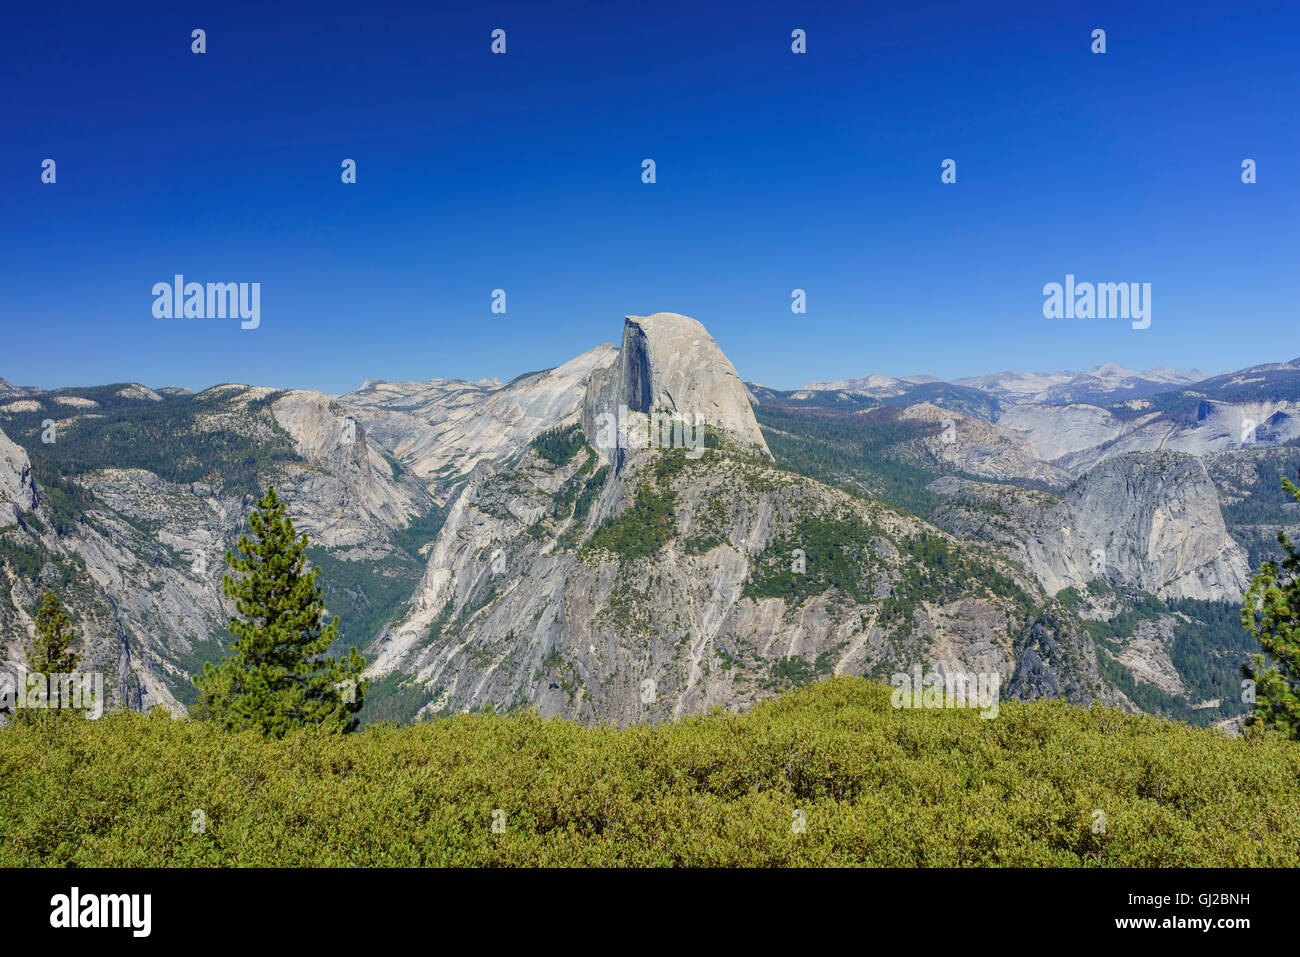 The beautiful landscape of Glacier Point in Yosemite National Park Stock Photo